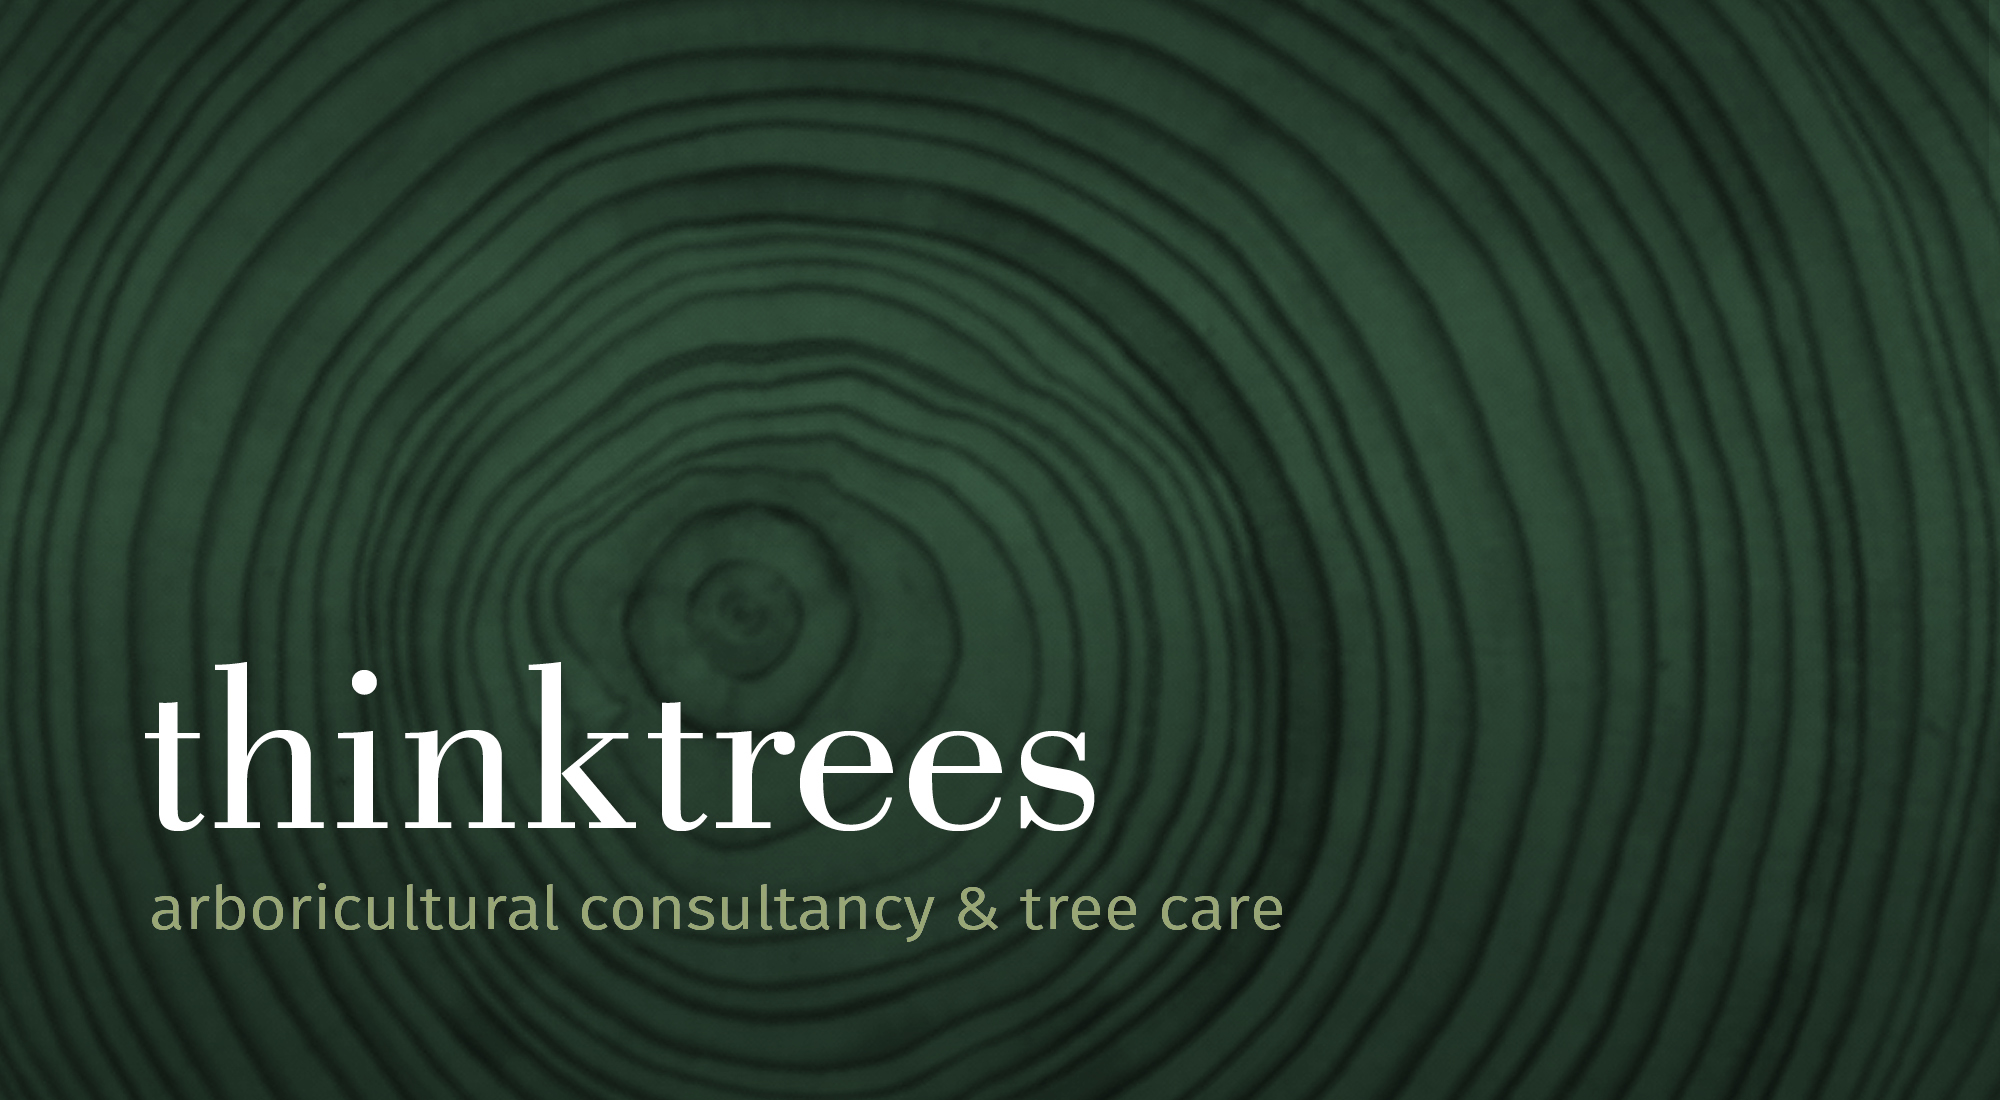 Arboricultural consultant and tree care Cheshire and Hertfordshire